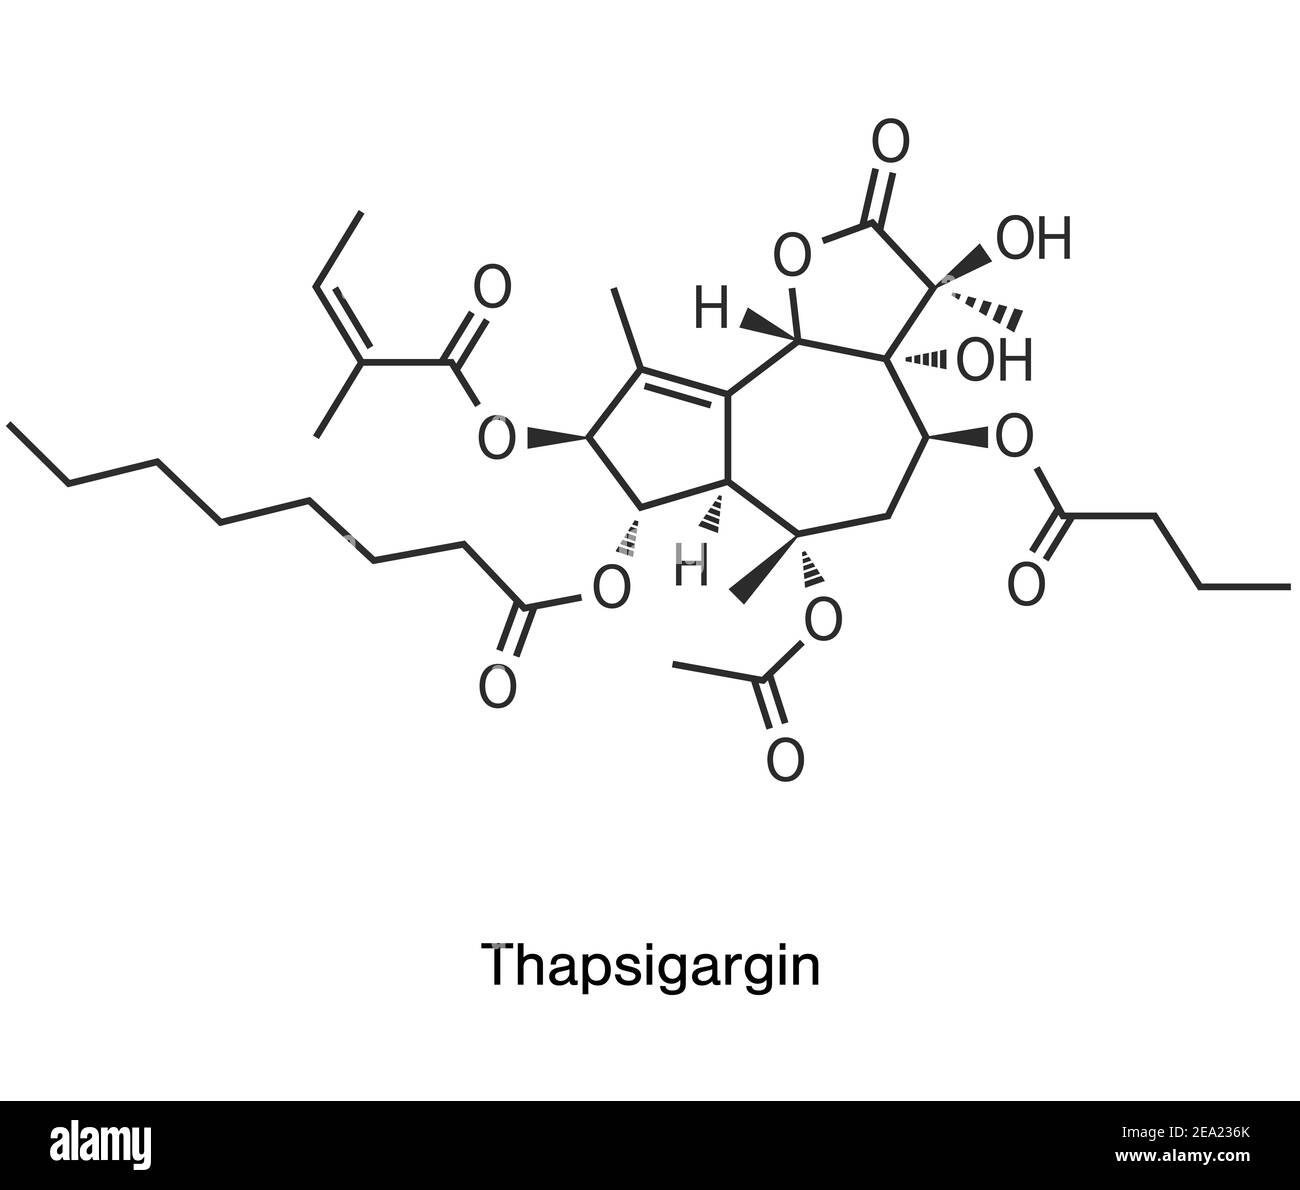 Thapsigargin chemical structure or skeletal formula illustration on white. According to recent researches the Thapsigargin substance derived from the poisonous plant Thapsia Garganica and studied for cancer treatment, could be effective against the coronavirus and to stop Covid 19. Stock Photo